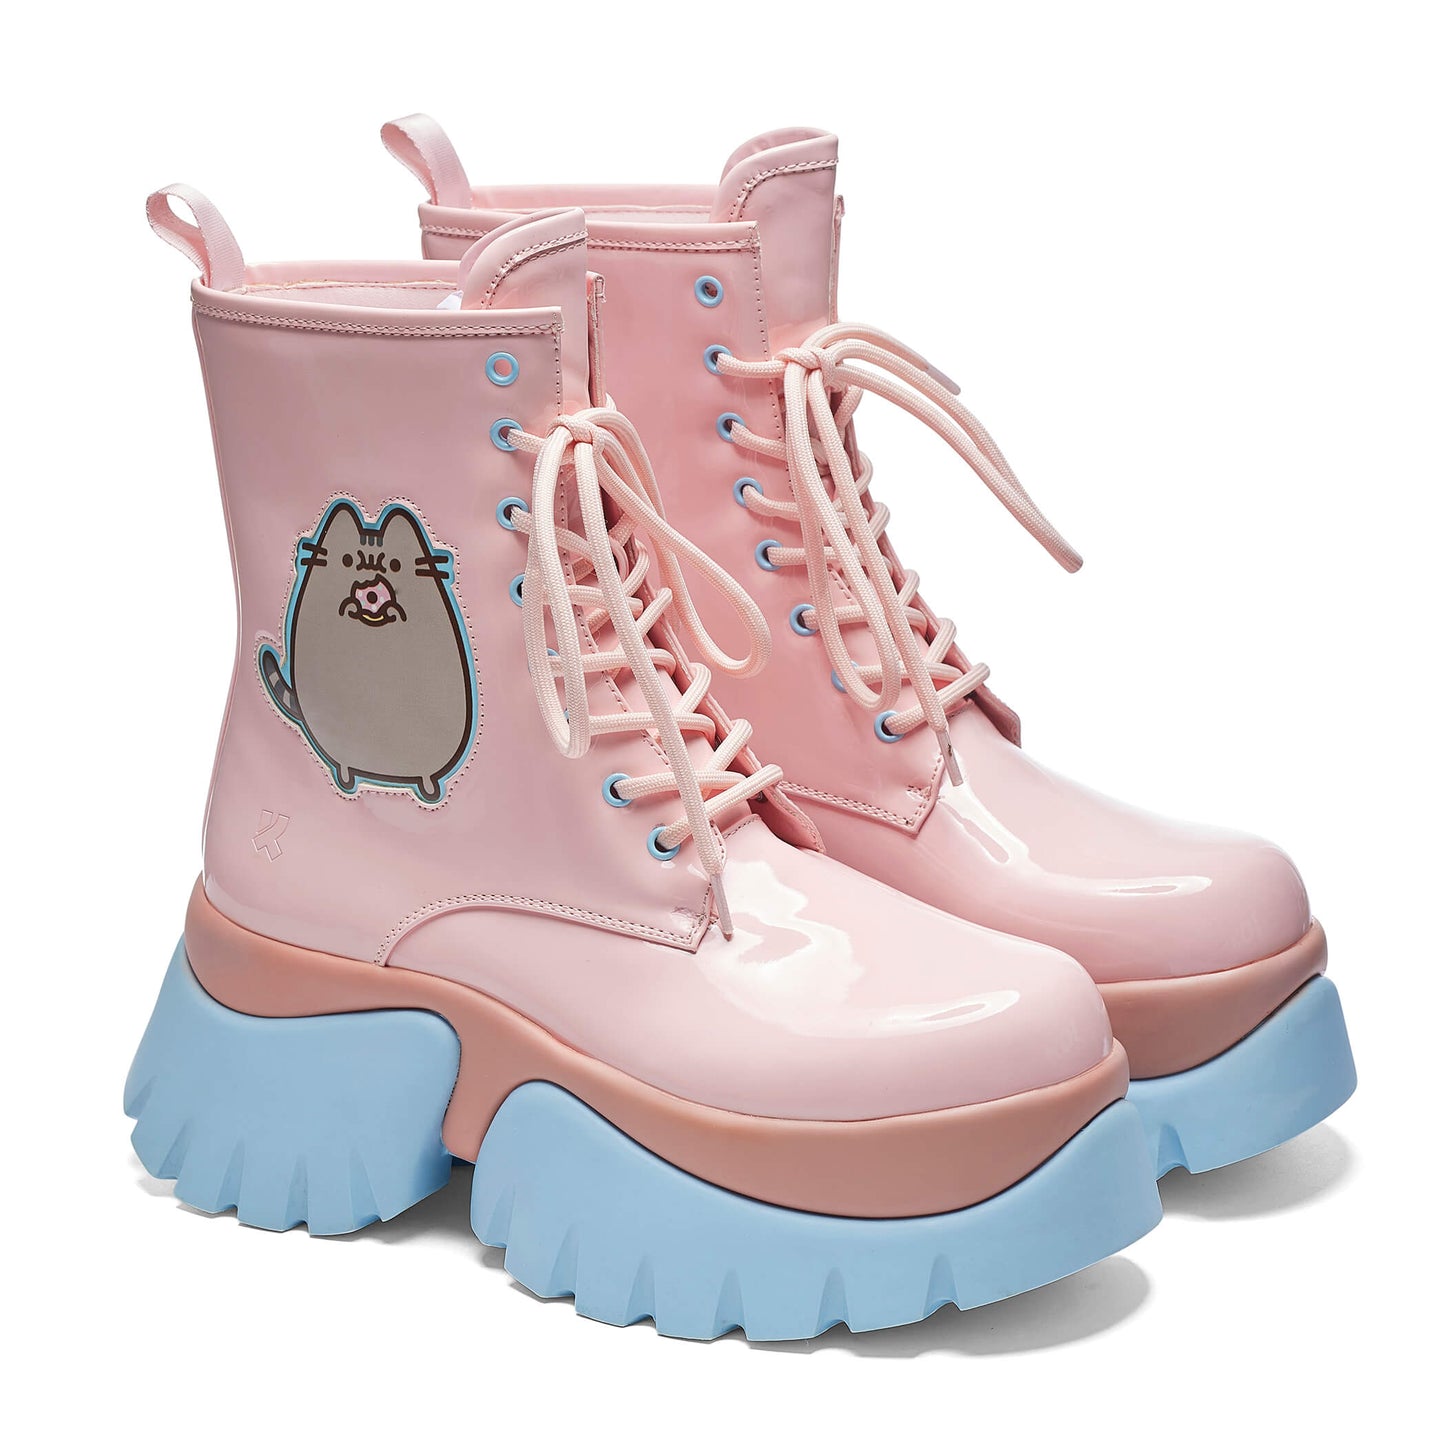 Pusheen Doughnuts Pastel Patent Boots - Ankle Boots - KOI Footwear - Pink - Three-Quarter View